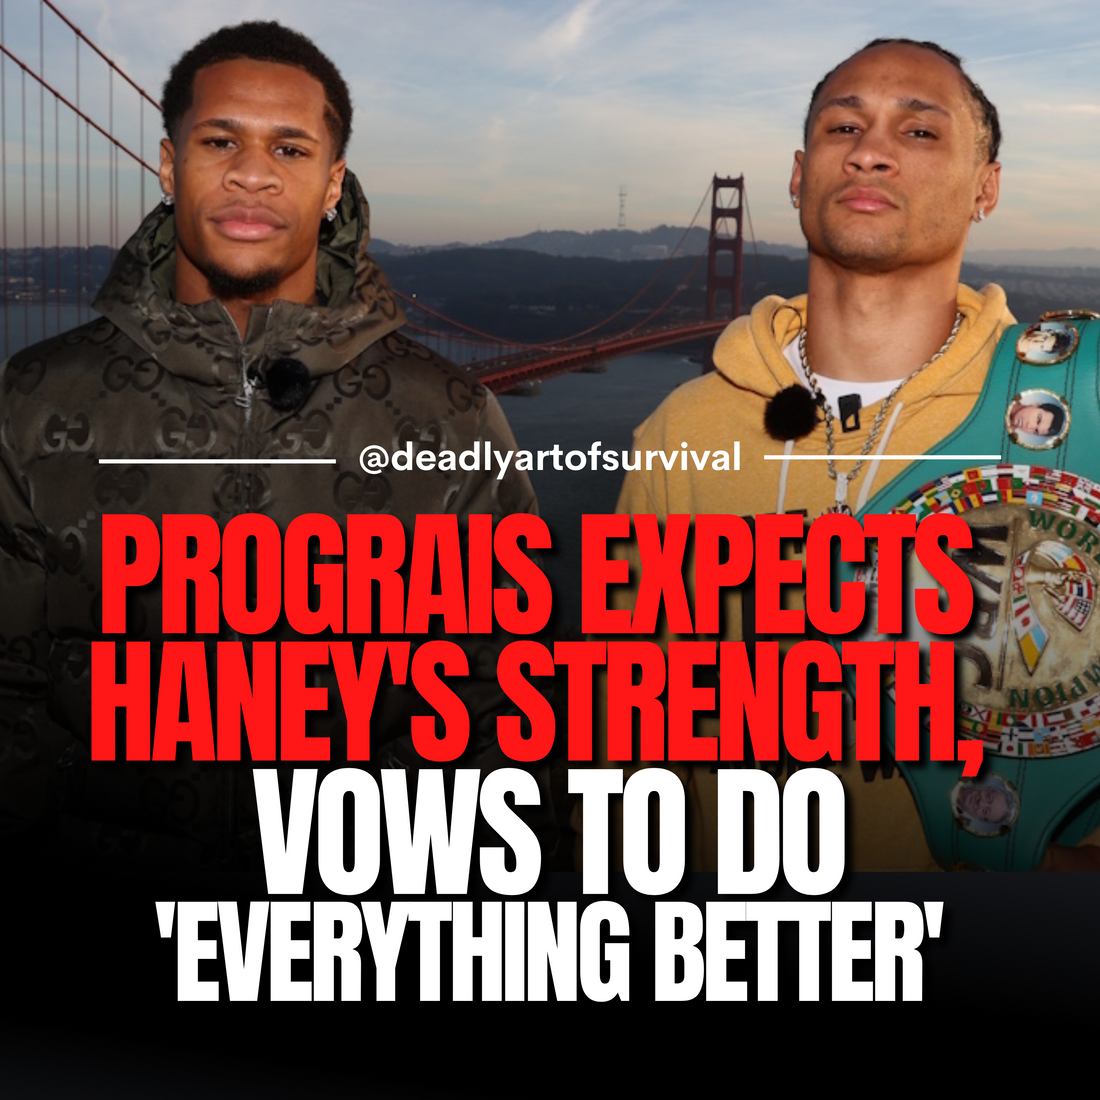 Prograis Anticipates Haney's Size and Strength, Vows to Outshine in Every Aspect